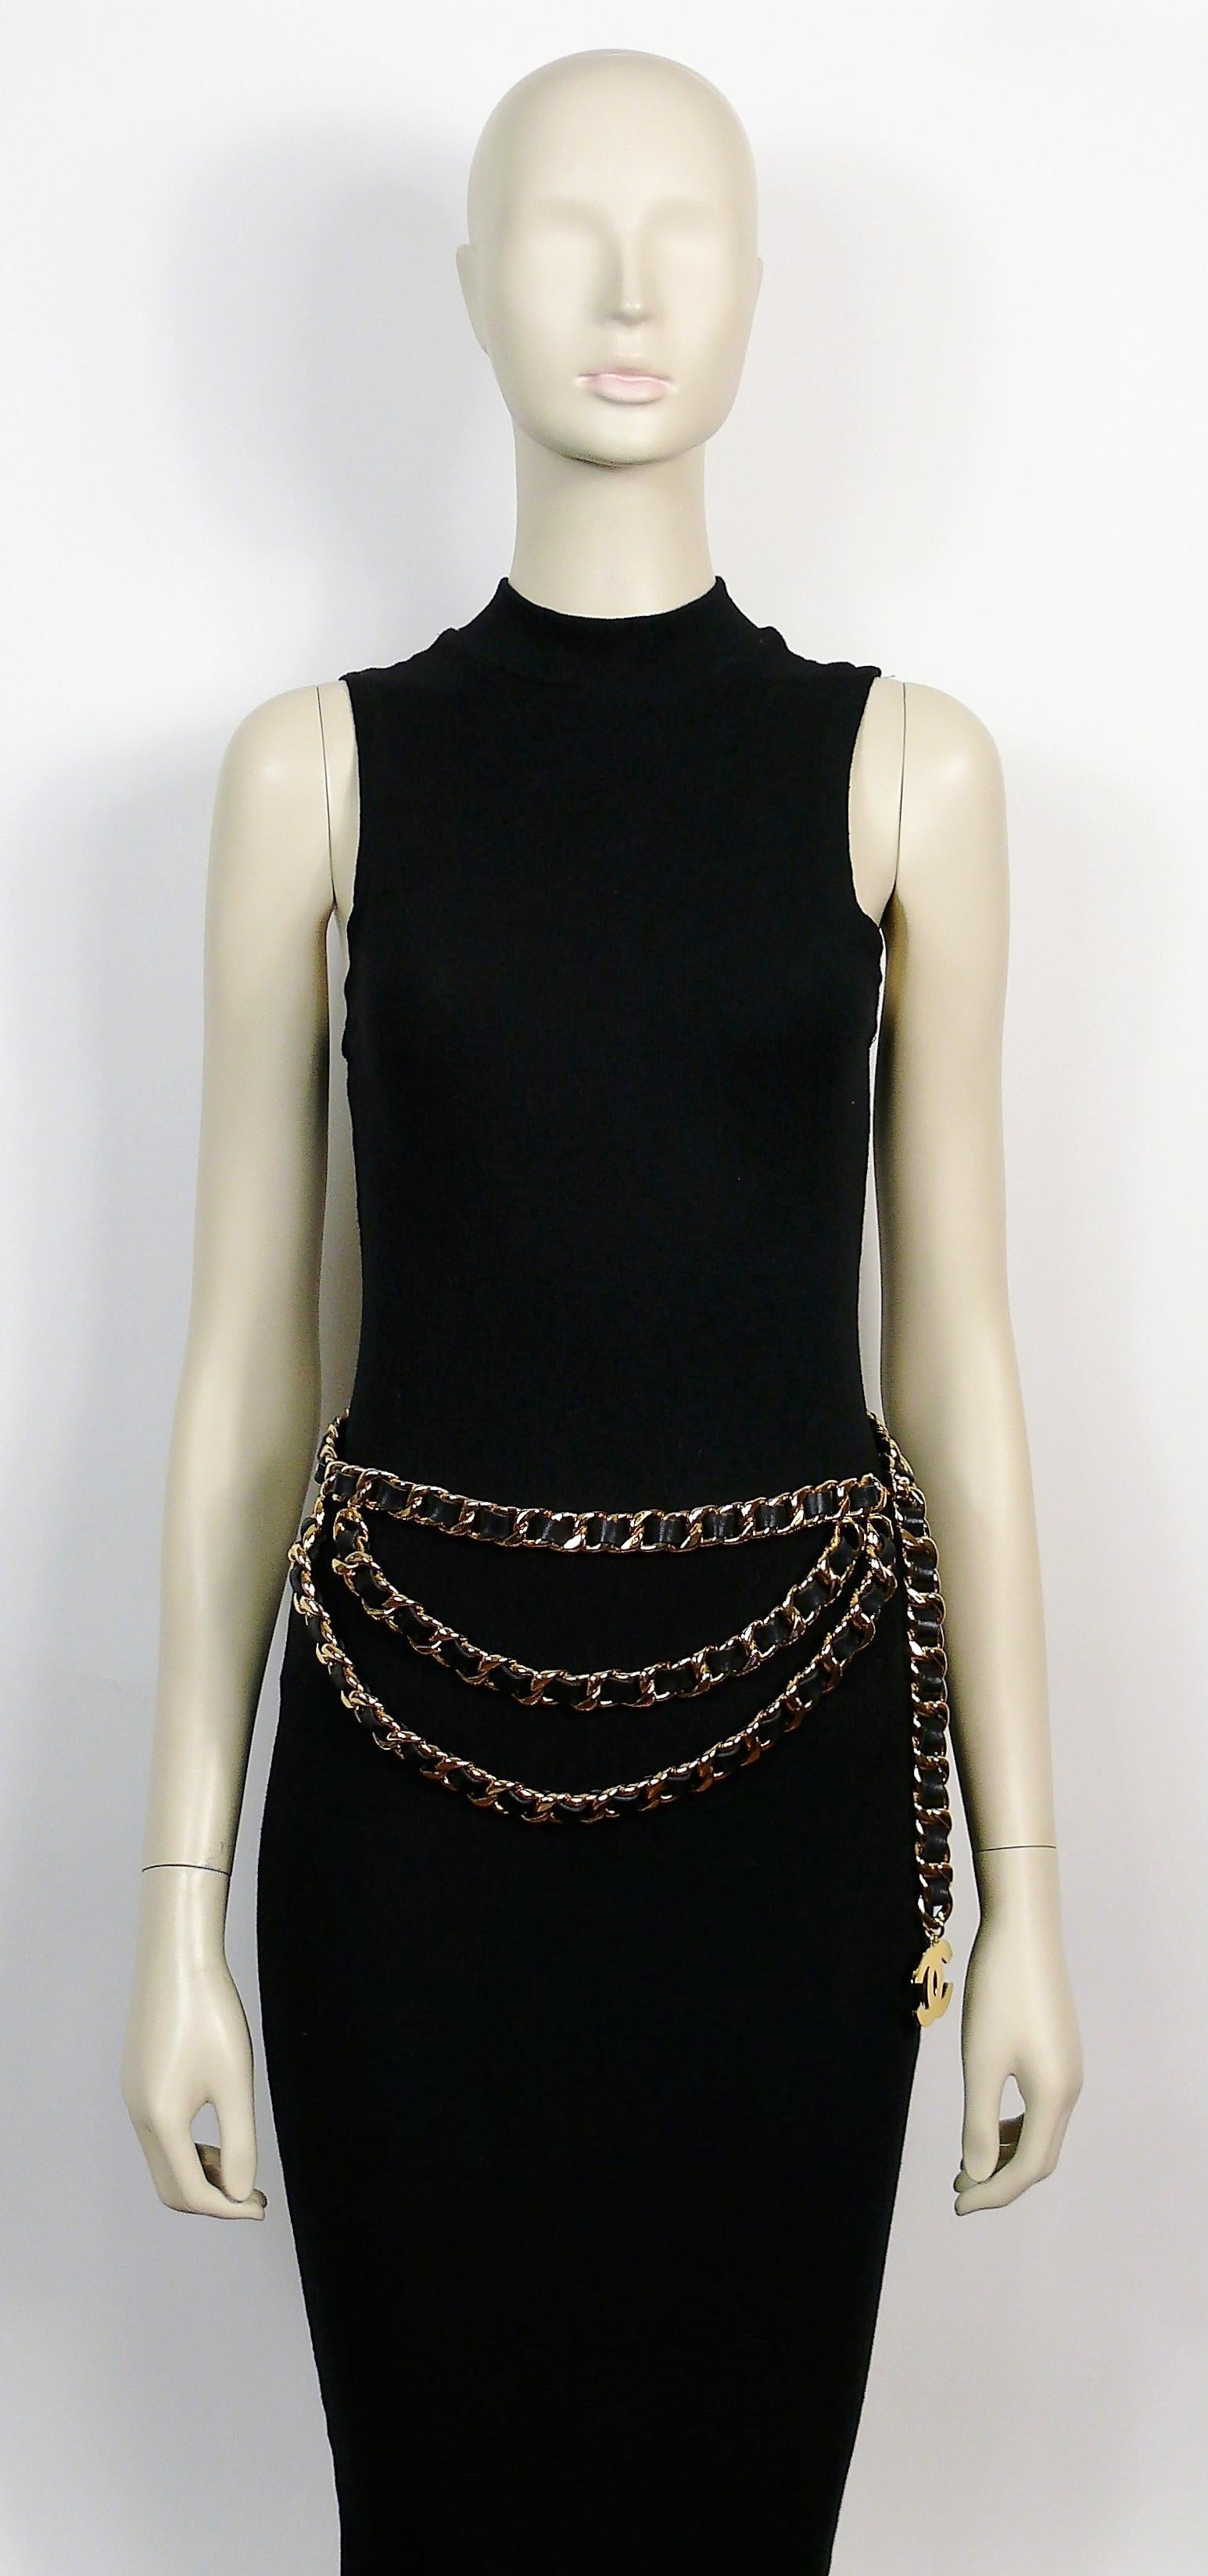 CHANEL vintage chunky gold toned chain belt with intertwined black leather and CC logo charm.

Collection 28.
Year : 1993.

One size fits all. Adjustable length.
Hook clasp.

Marked CHANEL 2 8 Made in France.

Indicative measurements : max. length